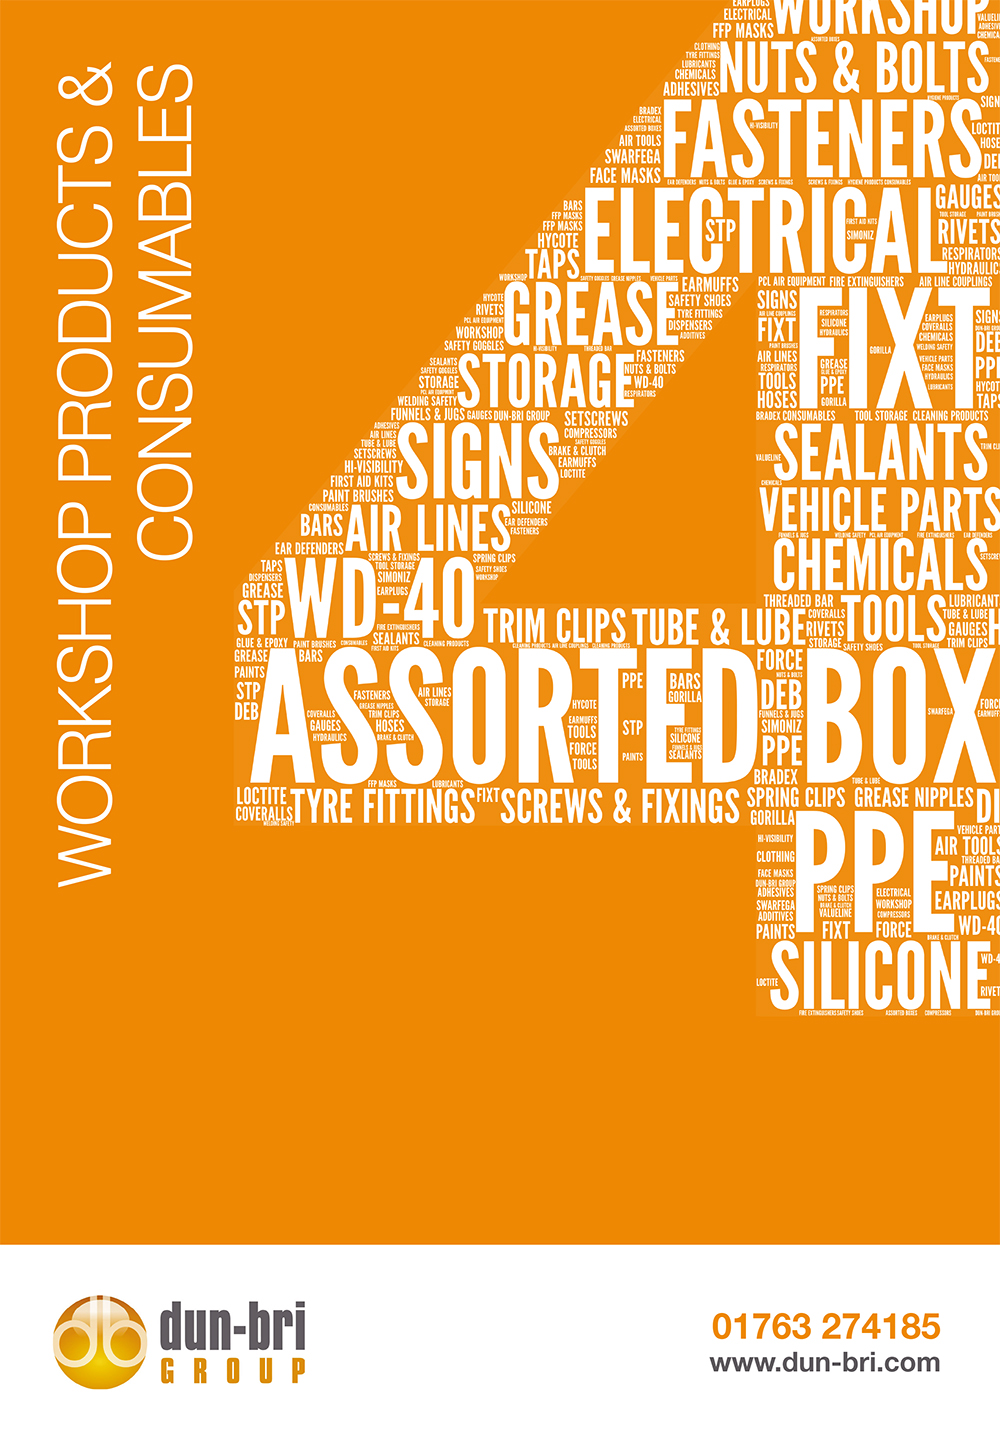 Workshop Products & Consumables Catalogue Cover